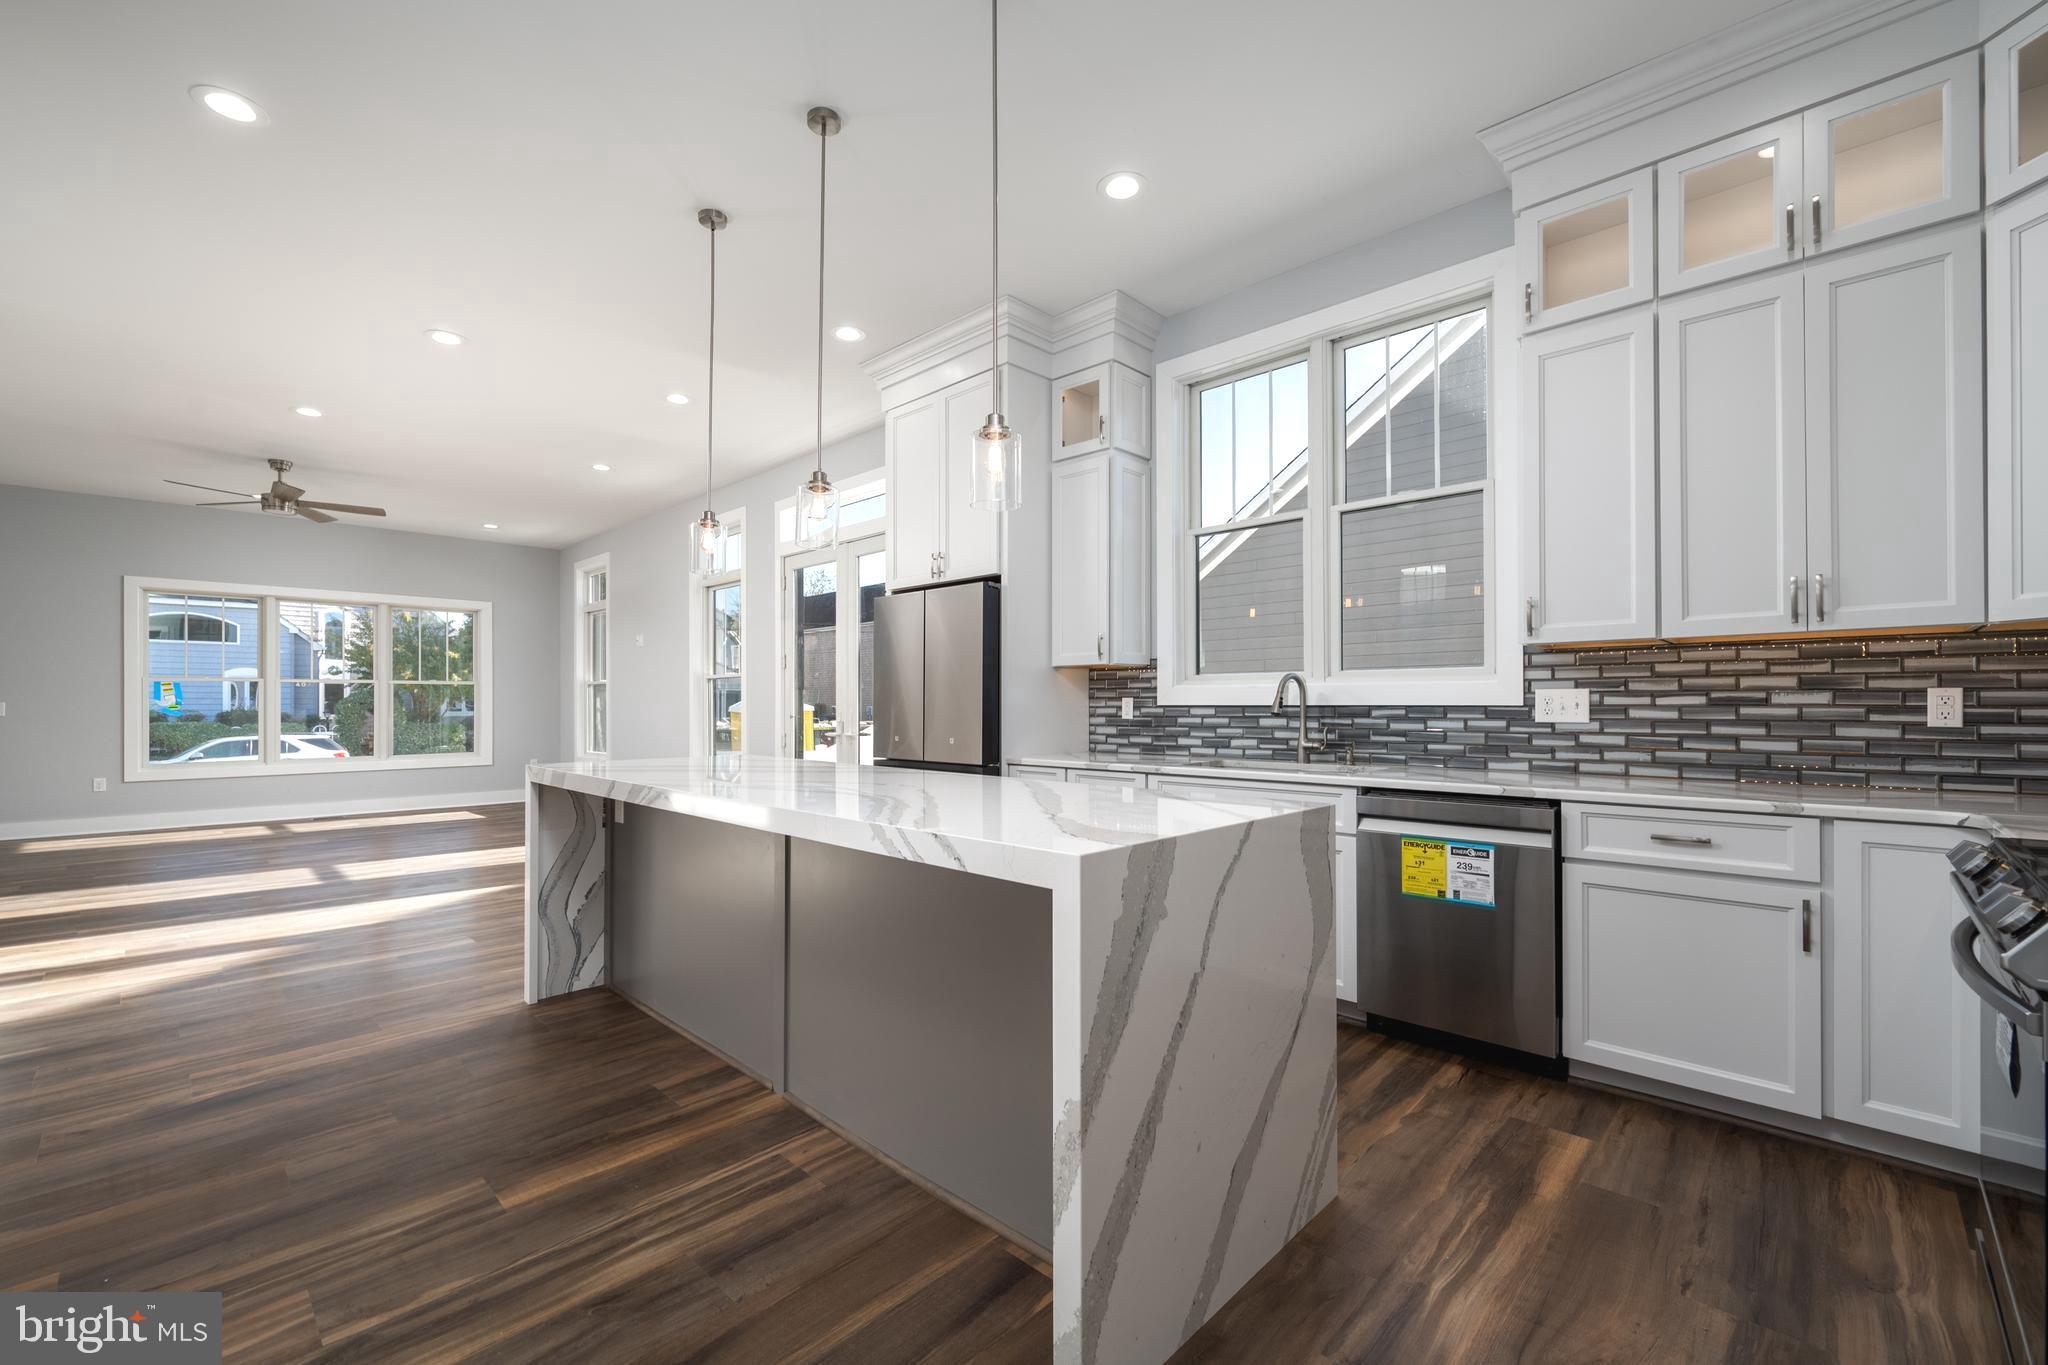 IMPRESSIVE BRAND NEW CONSTRUCTION BY J.B. BUILDERS IN THE HEART OF DOWNTOWN LEWES.  A Spacious 2 Story, 4 Bedroom, 3.5 Bath, 2,592 Square Foot Home with a Bright Open Floor Plan and Beautiful Luxury Vinyl Plank Flooring throughout. 10'6 Ceilings on the entire First Floor with an Upscale Gourmet Kitchen and Dining Area with a Walk-In Pantry, Anderson 400 Series windows, Extra Shelving in all Closets, Cement Conditioned Crawl Space and Full Yard Irrigation with Sod and 2 Zoned HVAC. Relaxing Rear Fenced-In Paver Patio along with a Paver Driveway and Front Paver Walkway. Walk or Bike to downtown Lewes, the Beaches, the State Park and all Shopping. 1 Block from George  H. P Smith Park, Blockhouse Pond and the Historic Lewes Farmers Market. Also 2 Blocks to Beebe Hospital. Don't Miss this Opportunity with Terrific Value.